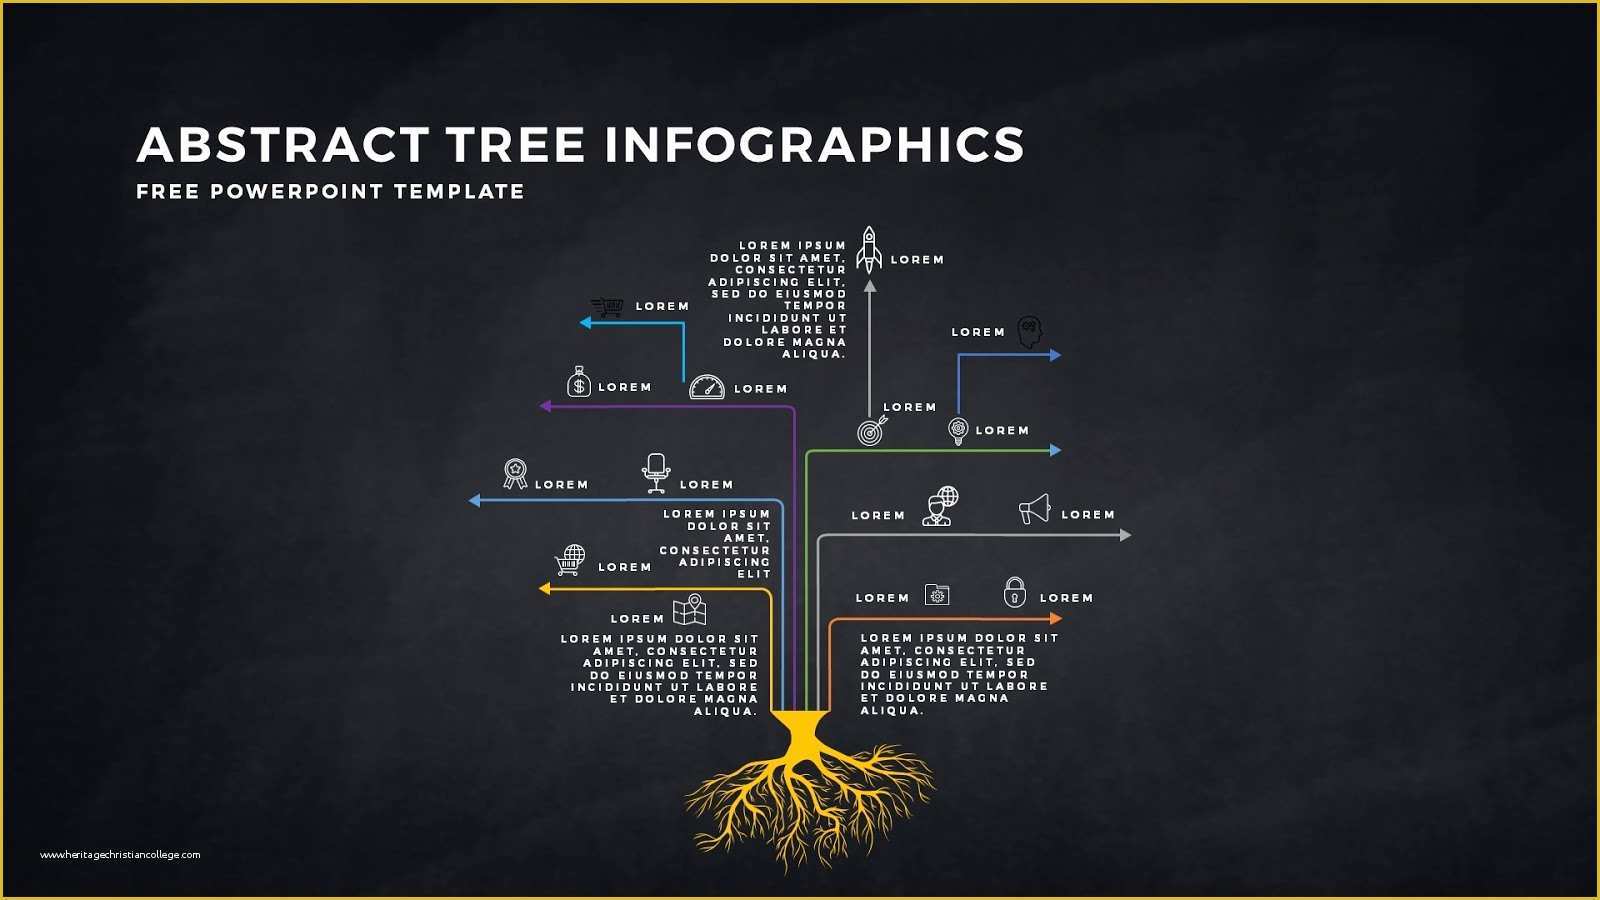 Infographic Template Powerpoint Free Of Free Tree Powerpoint Template with Infographic Elements